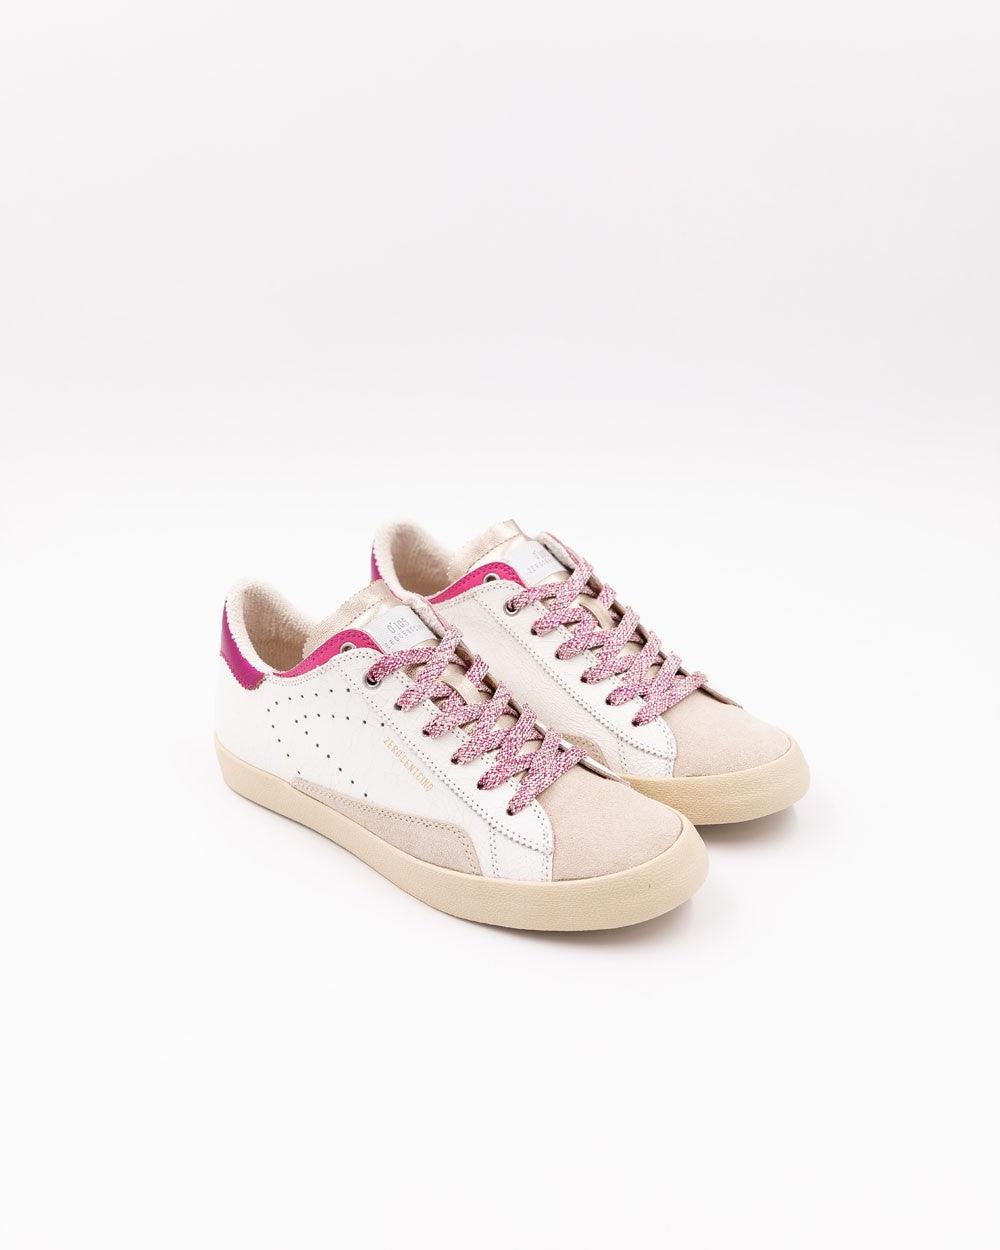 0-105 SC06 Fuchsia Pink Trainer - MADE THE EDIT